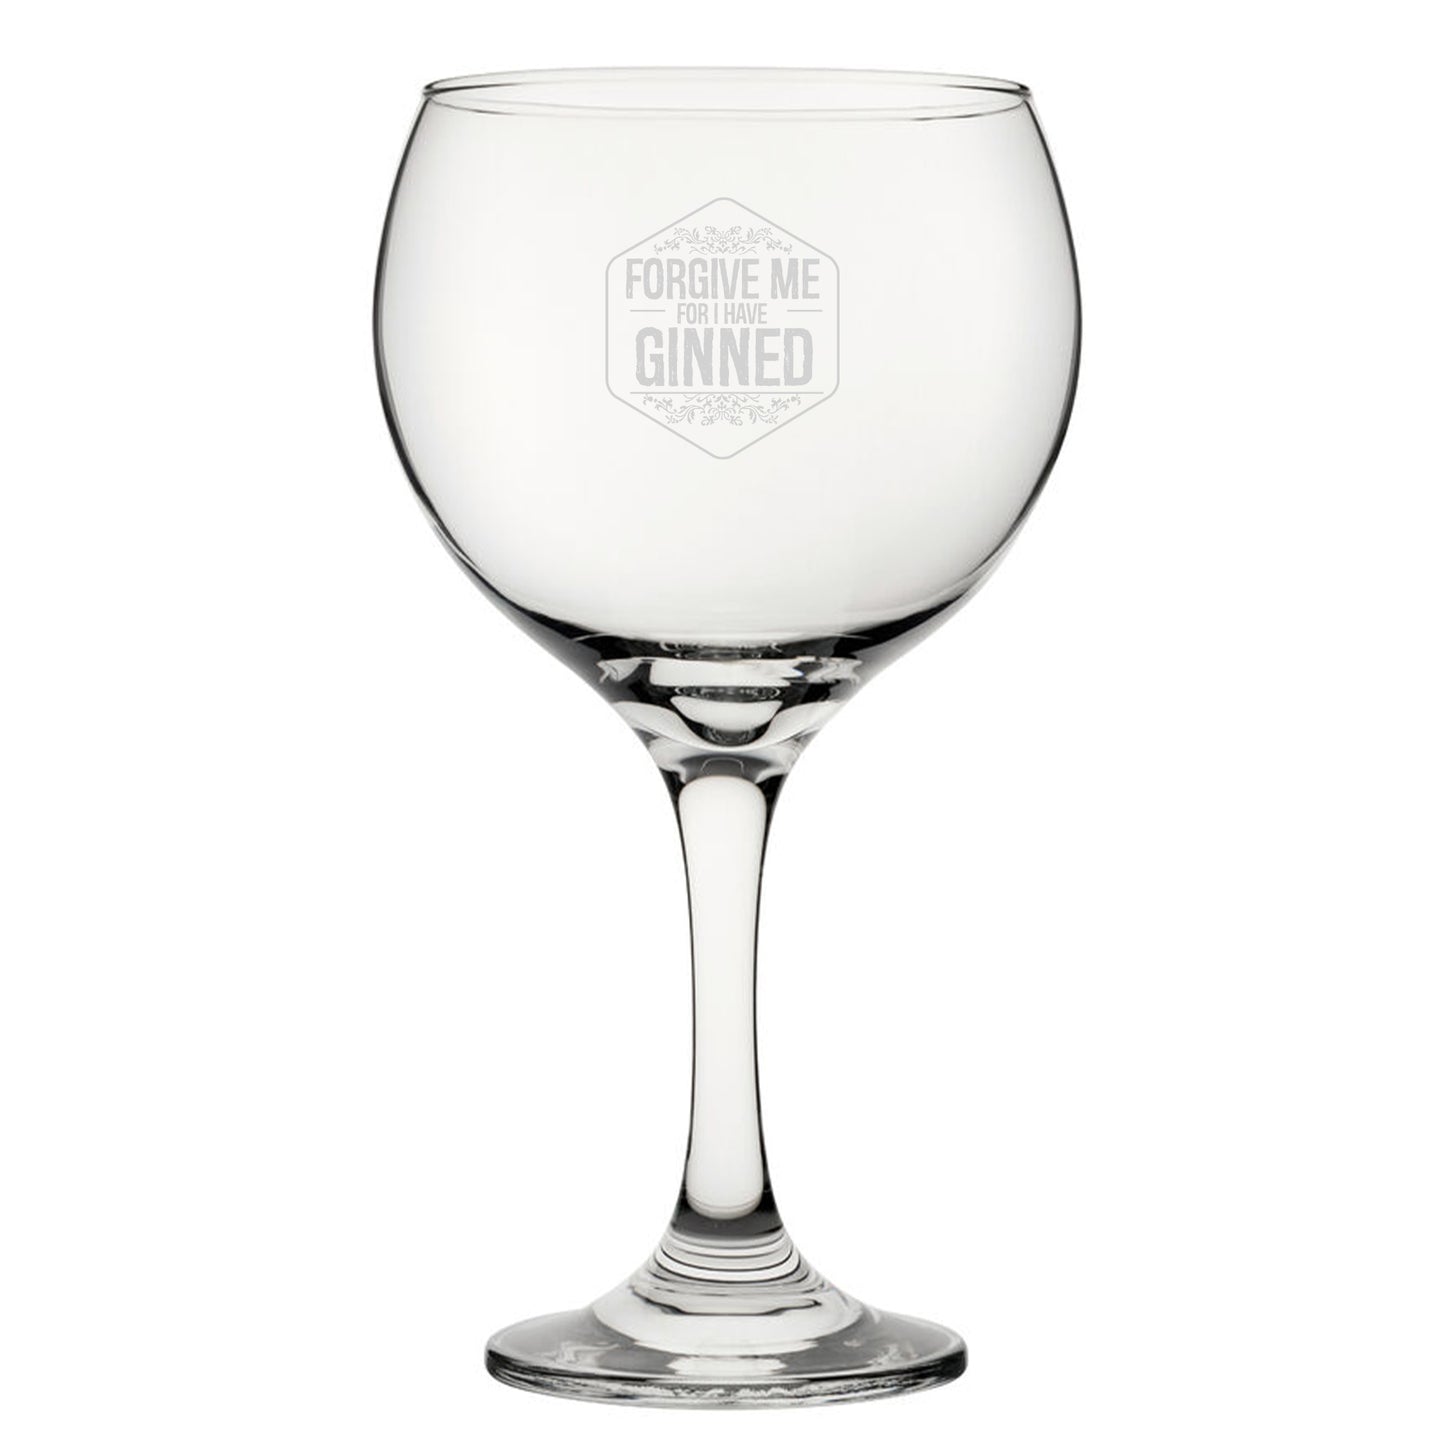 Forgive Me For I Have Ginned - Engraved Novelty Gin Balloon Cocktail Glass Image 1